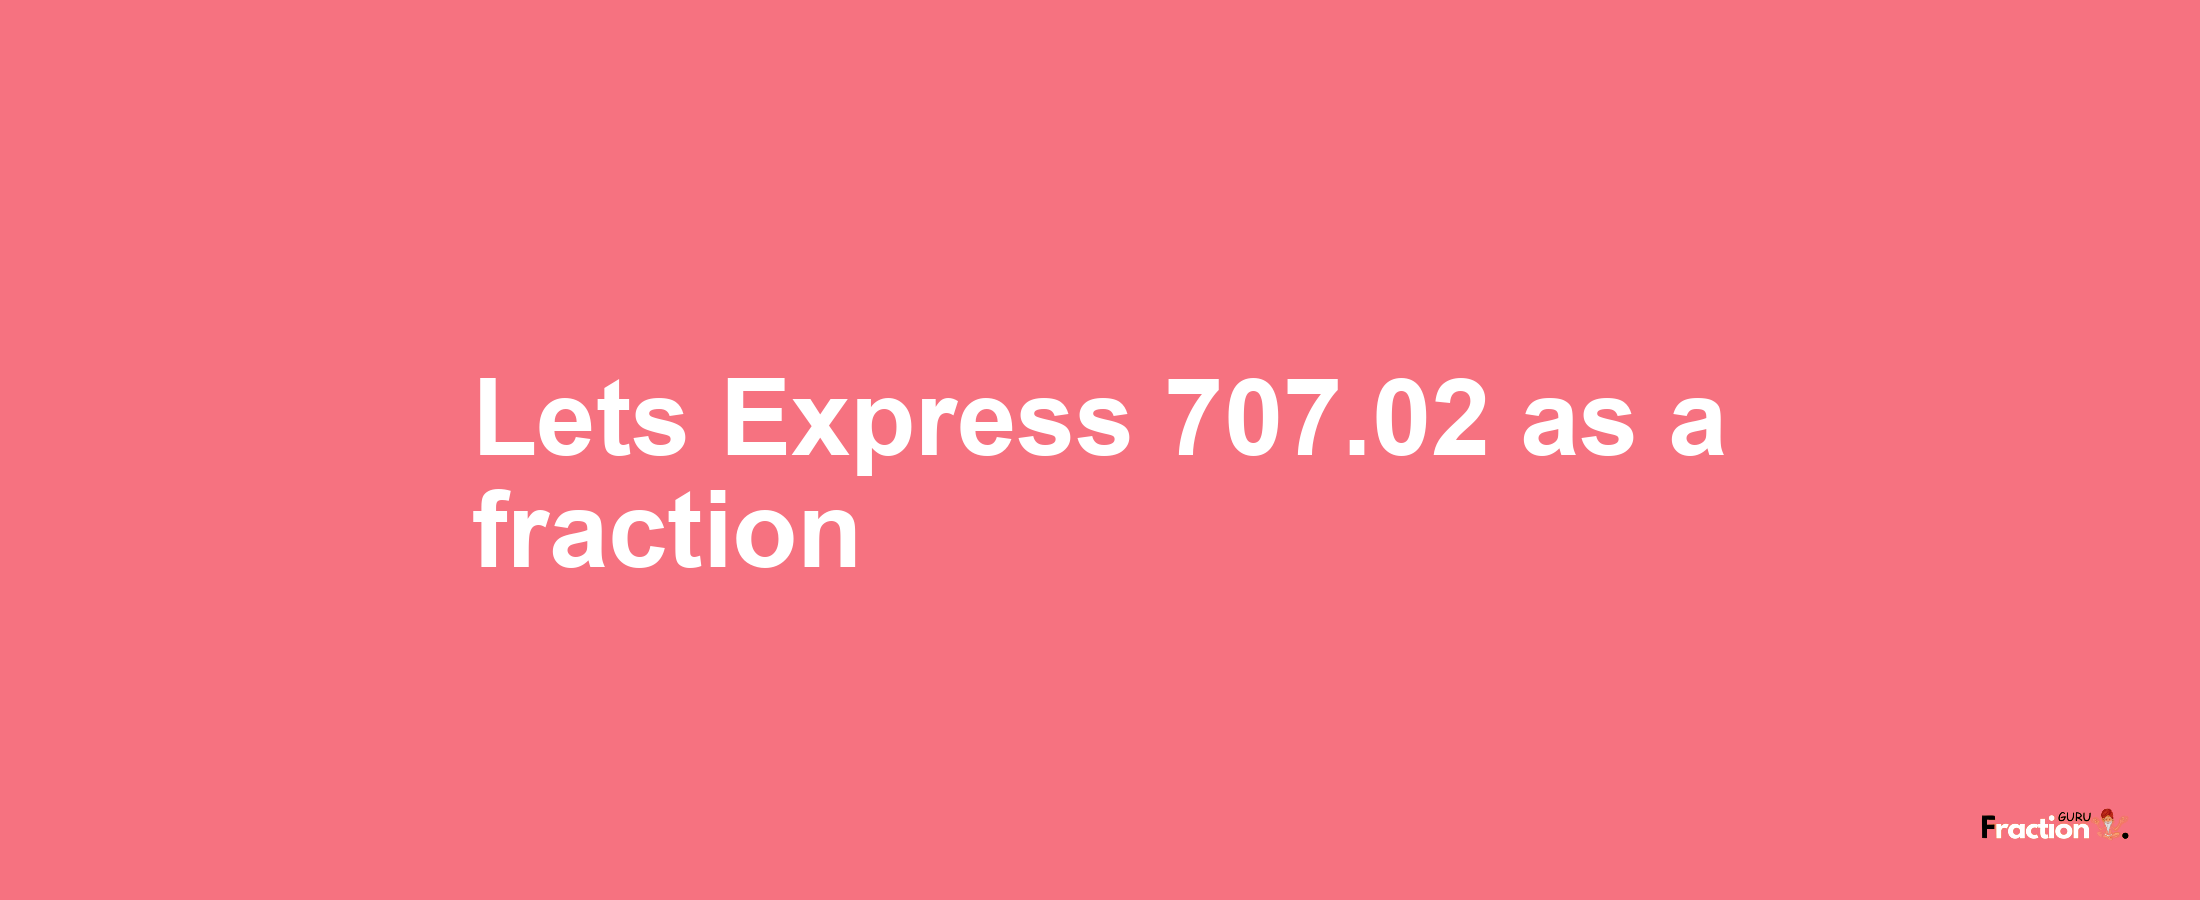 Lets Express 707.02 as afraction